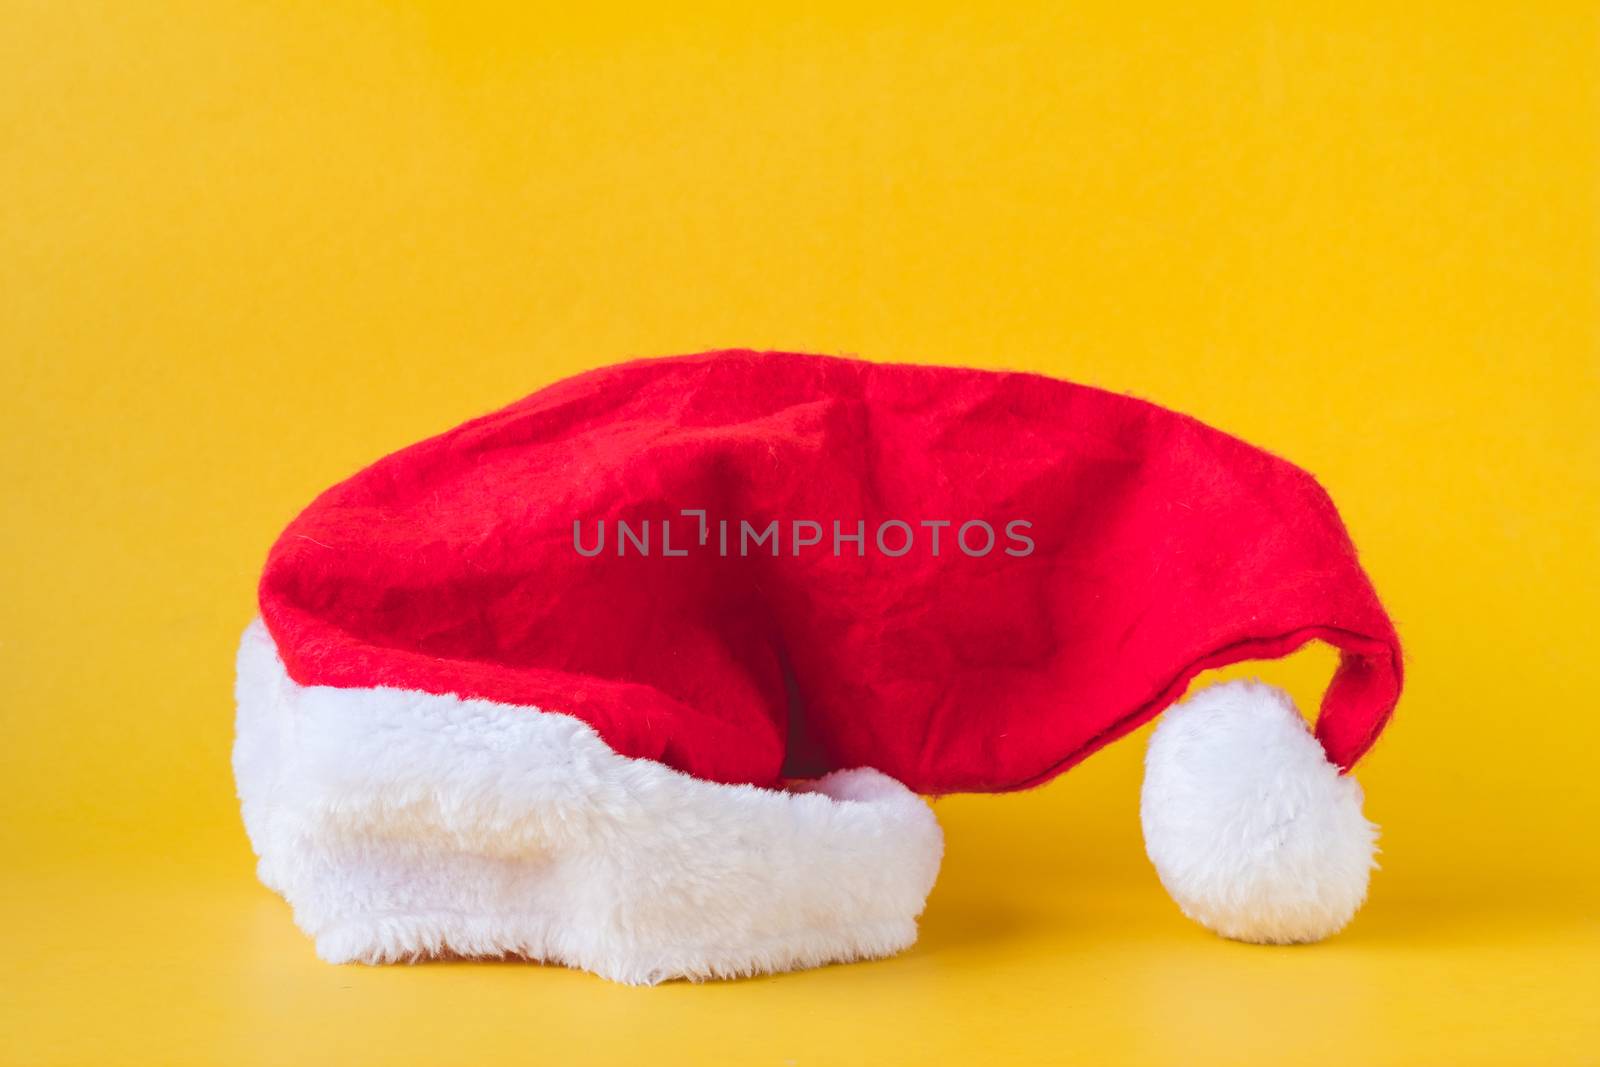 Santa Claus red hat on yellow background. Christmas concept by ronnarong